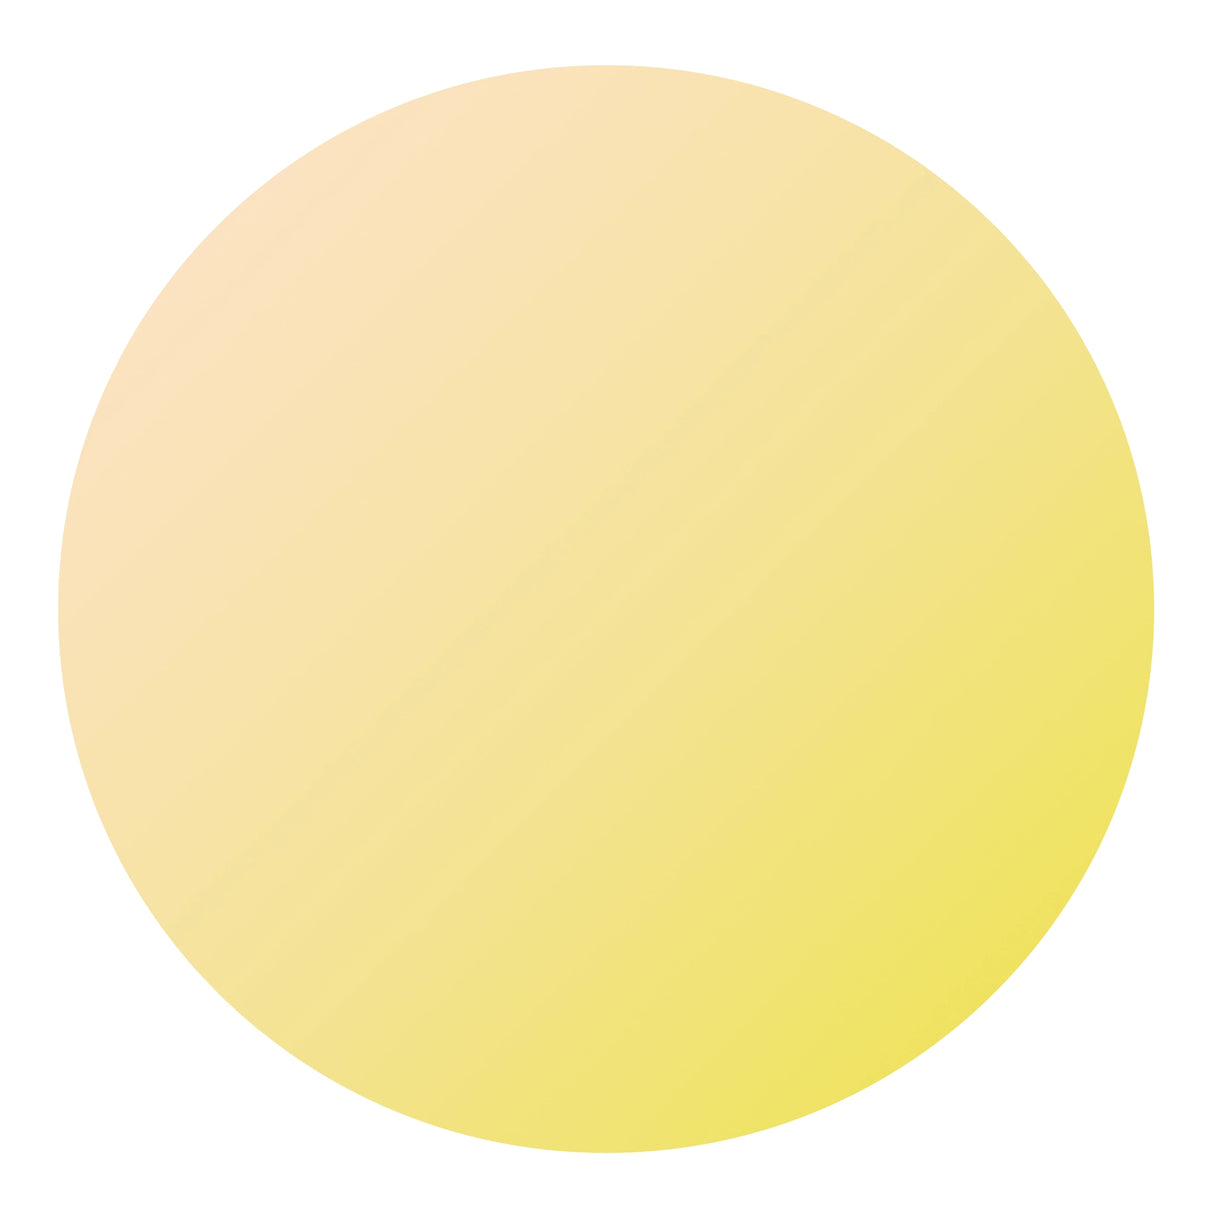 permanent vinyl cold color change pv beige to yellow